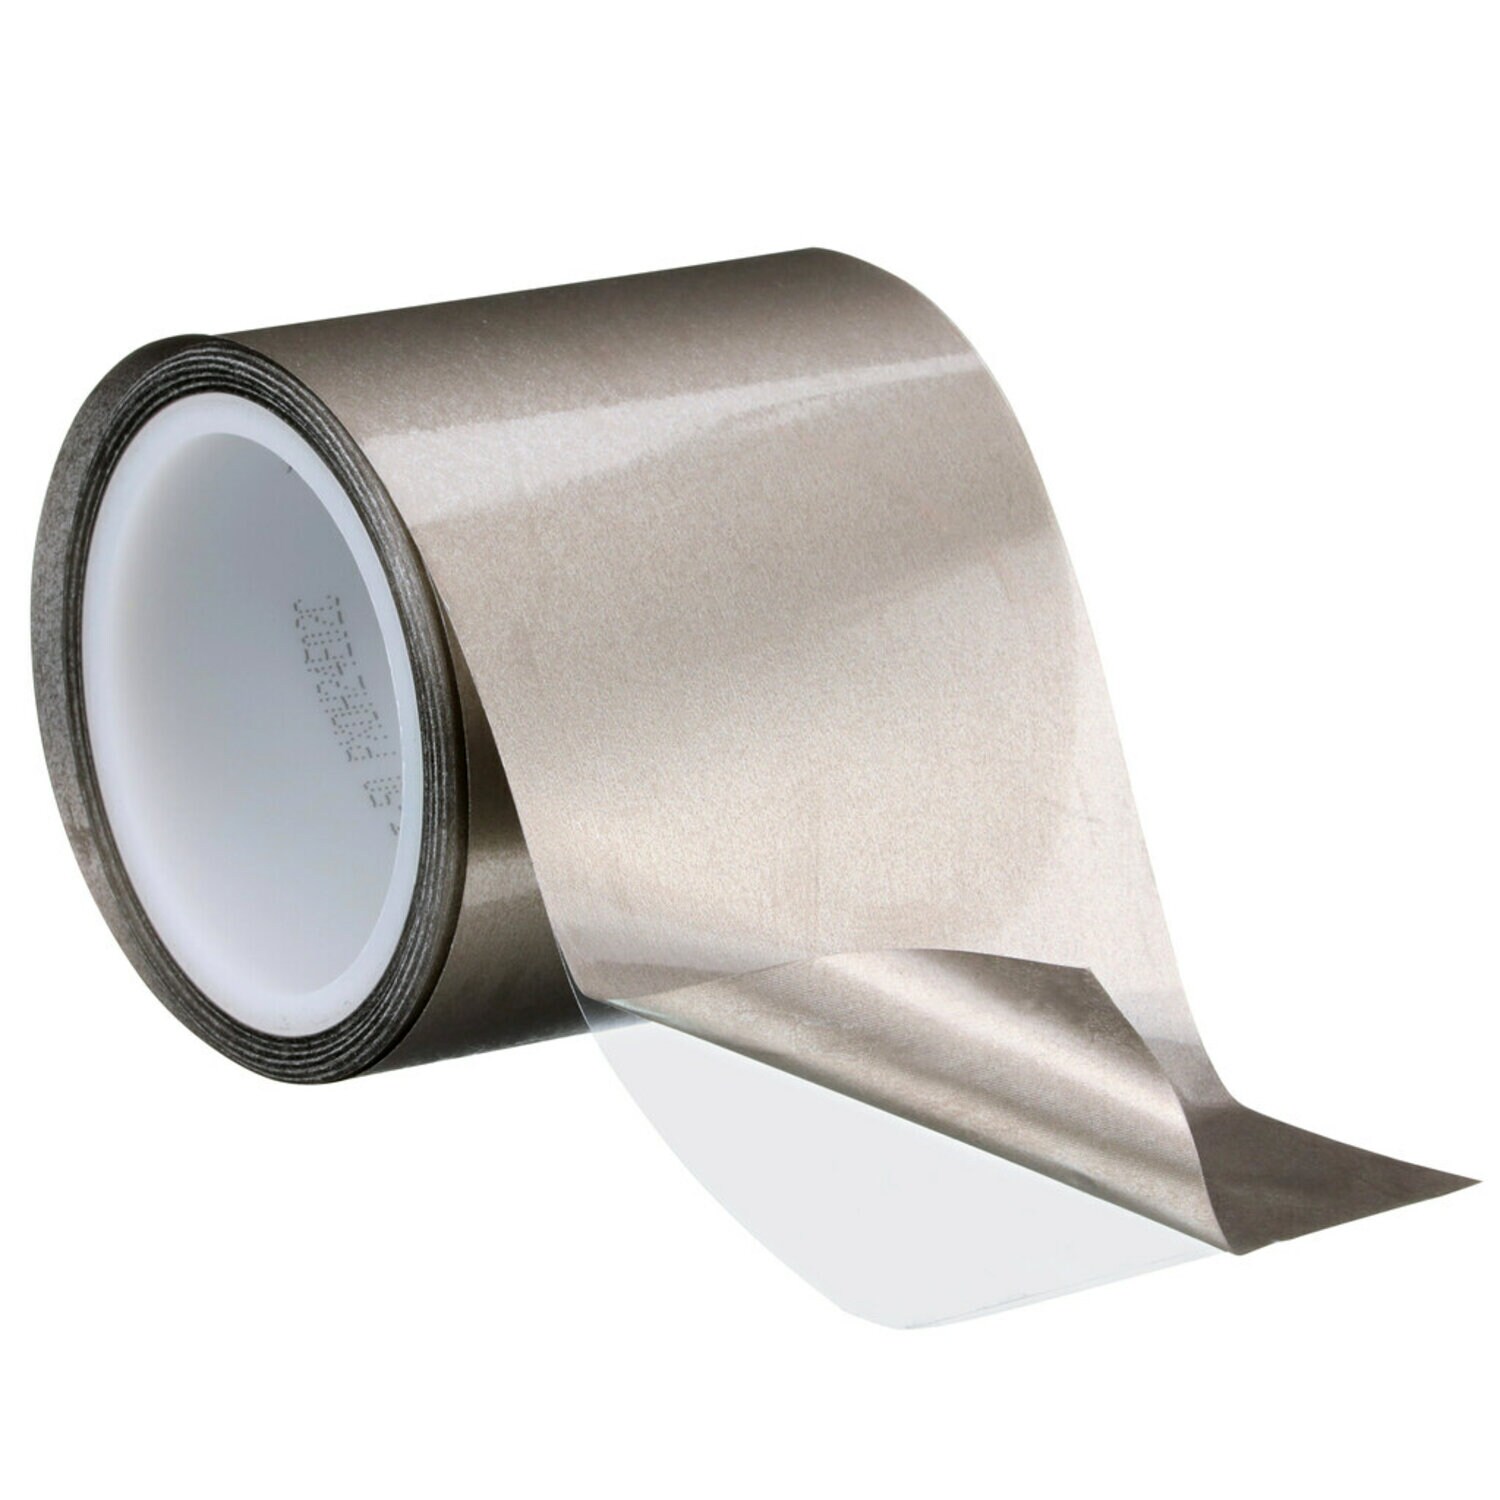 7100313603 - 3M Electrically Conductive Double-Sided Tape 5113DFT-50, Grey, 50 mm x 30 m, 8 Rolls/Case